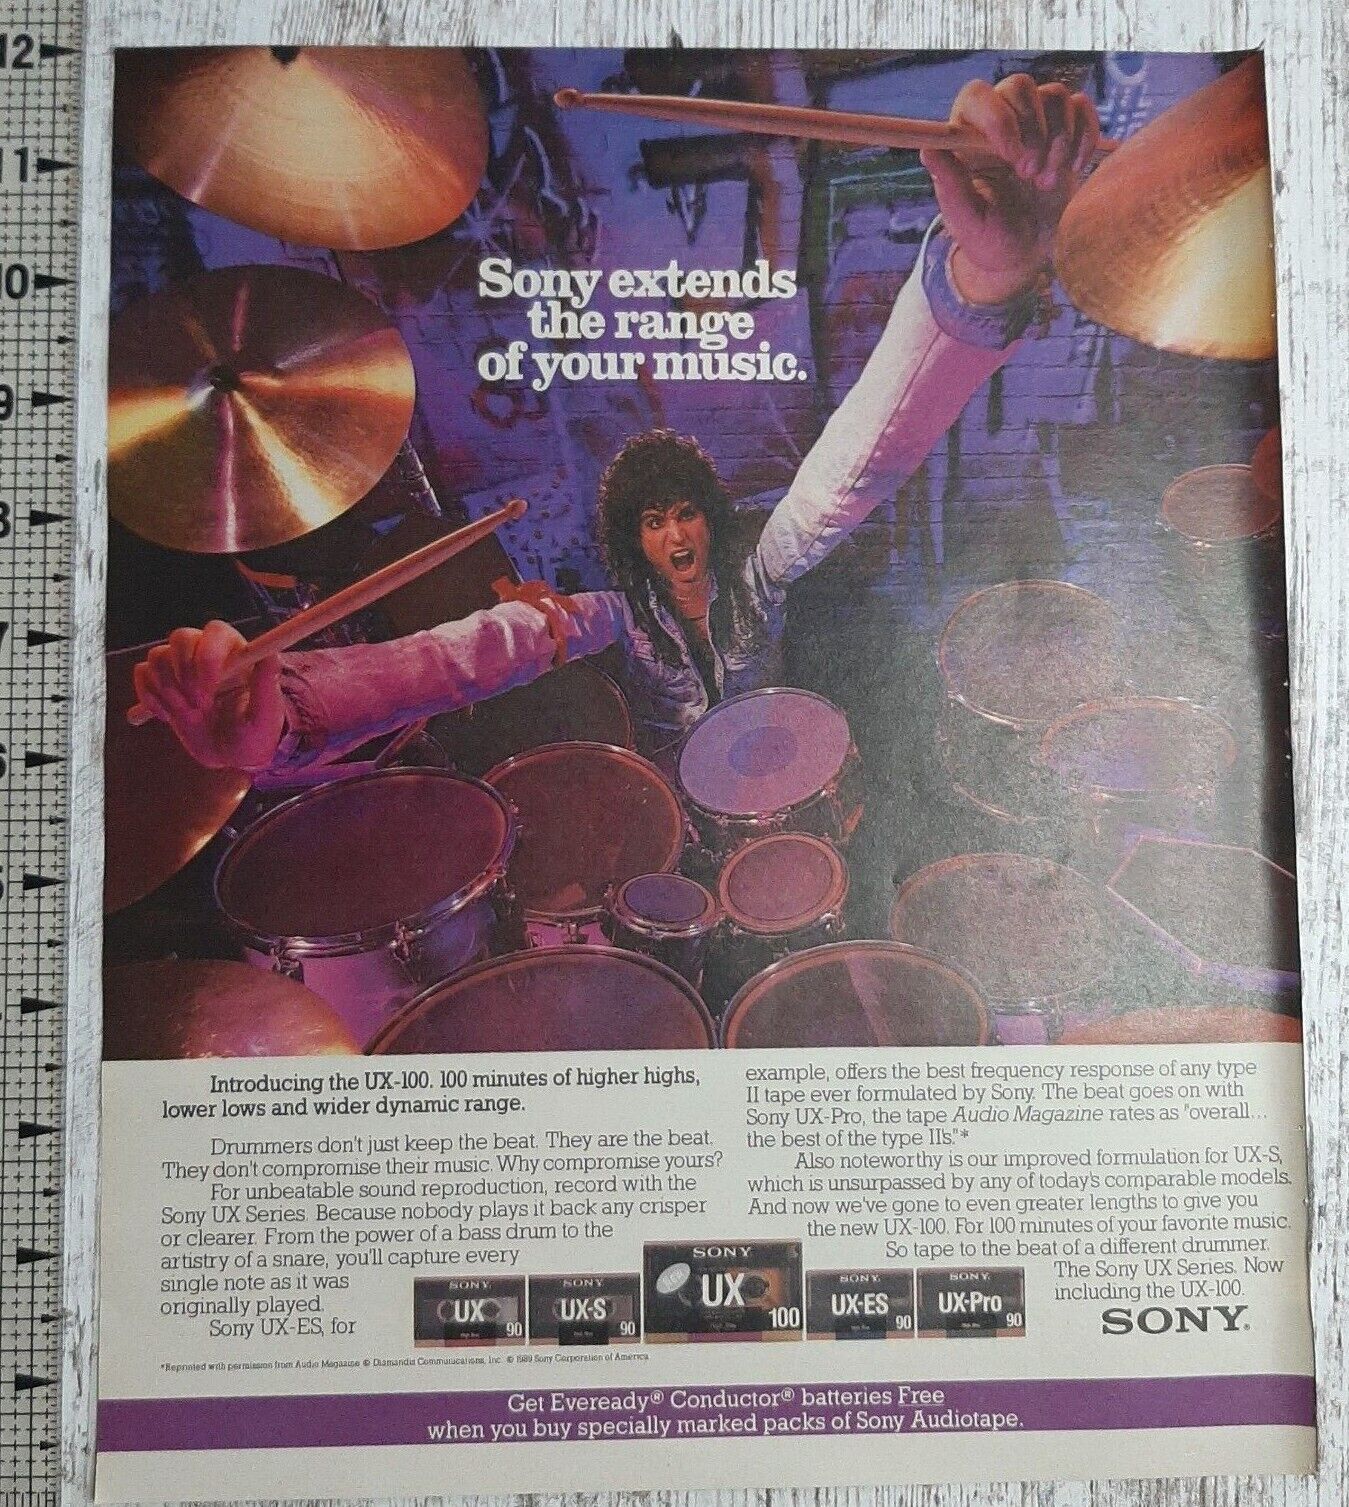 1989 Sony Vintage Print Ad Cassette Tapes Drummer Cymbals Drums Extend Music